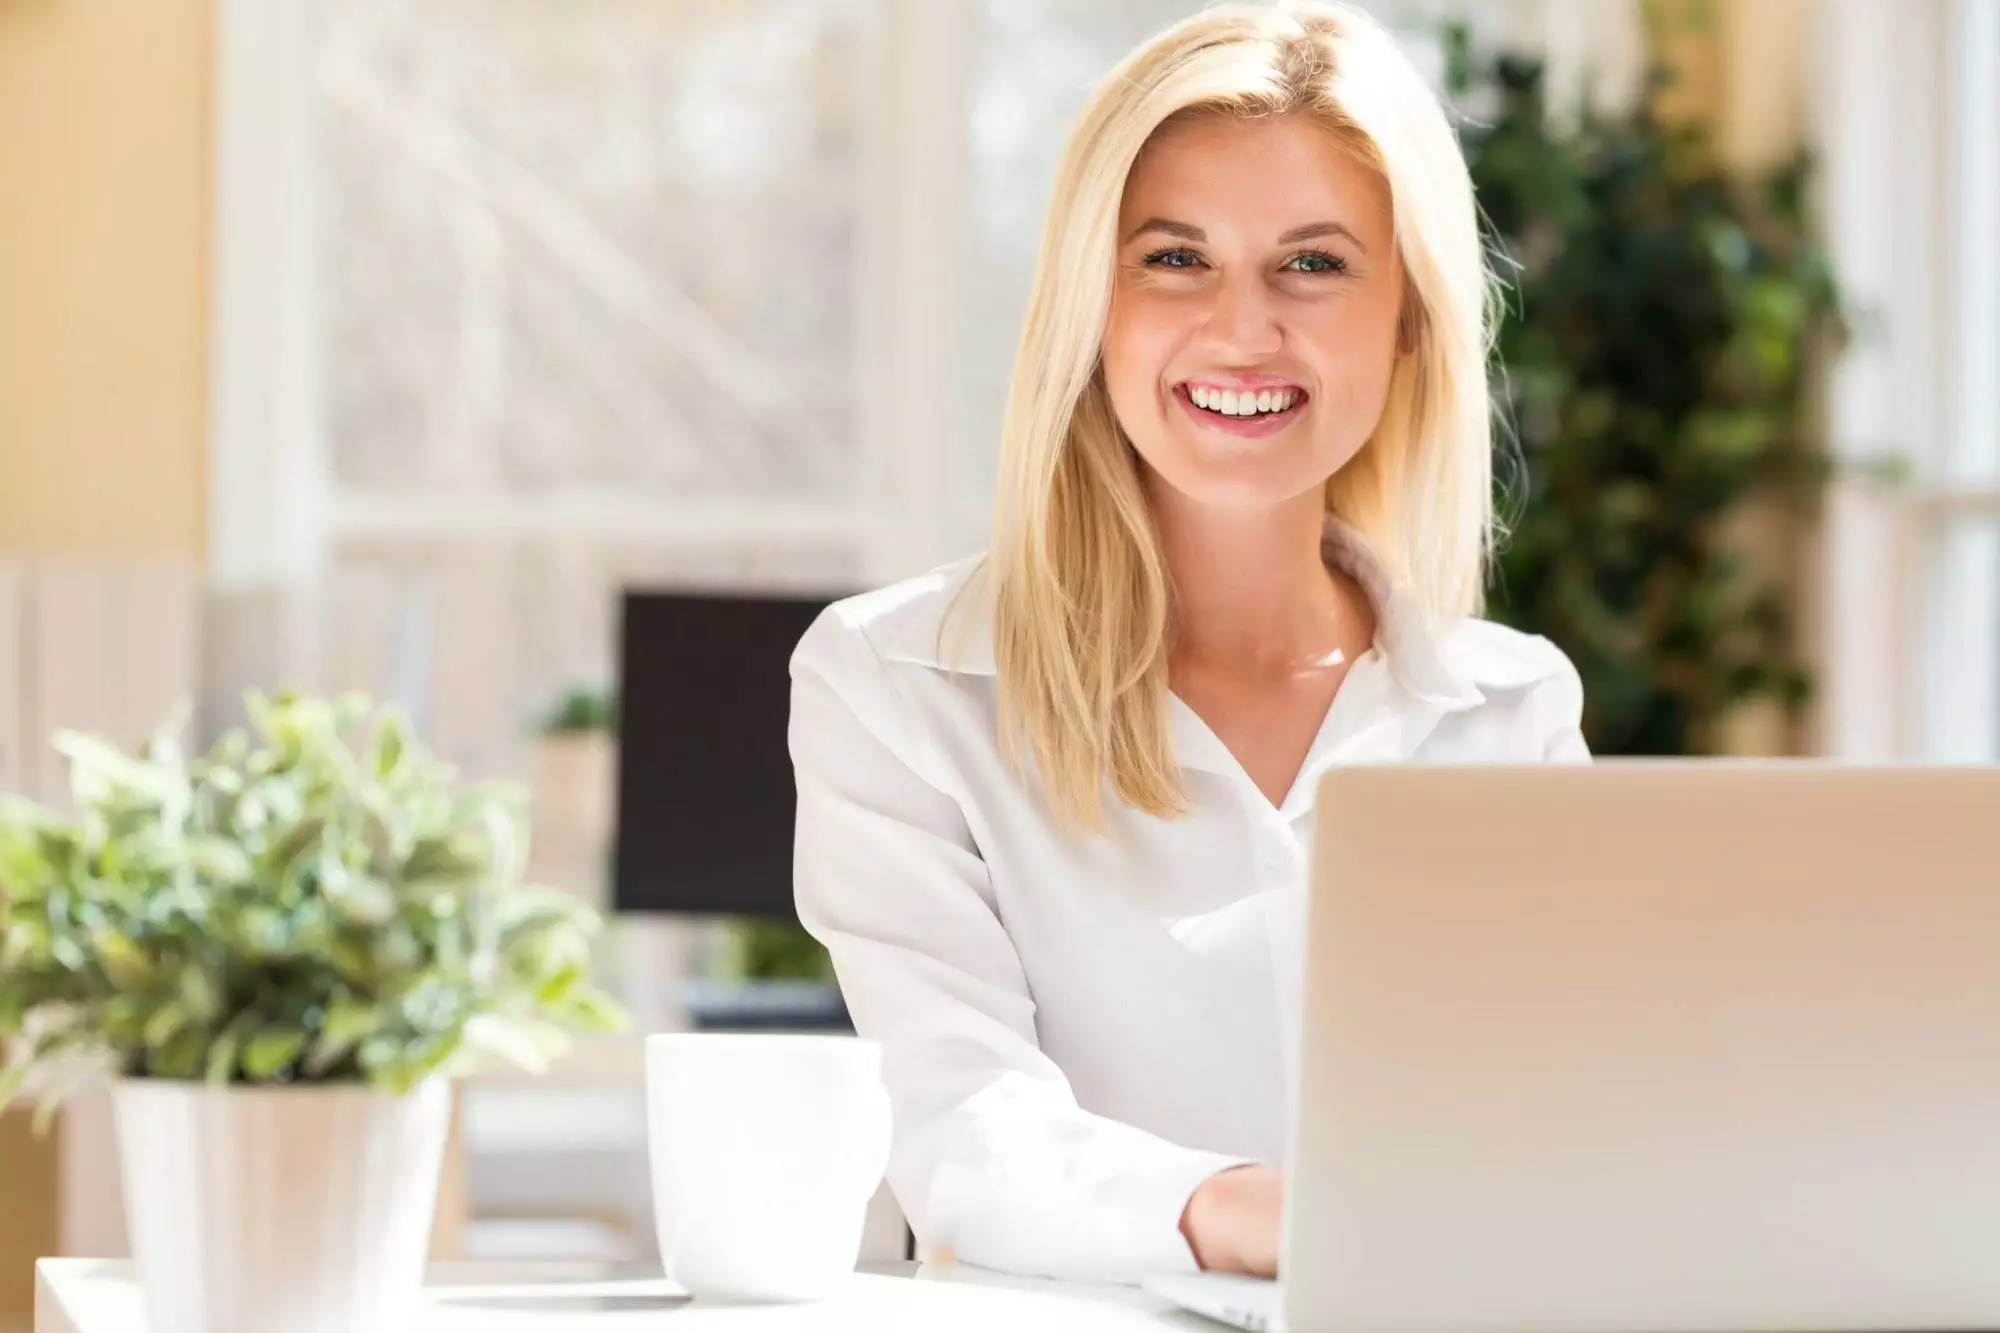 Smiling woman working on laptop indoors.